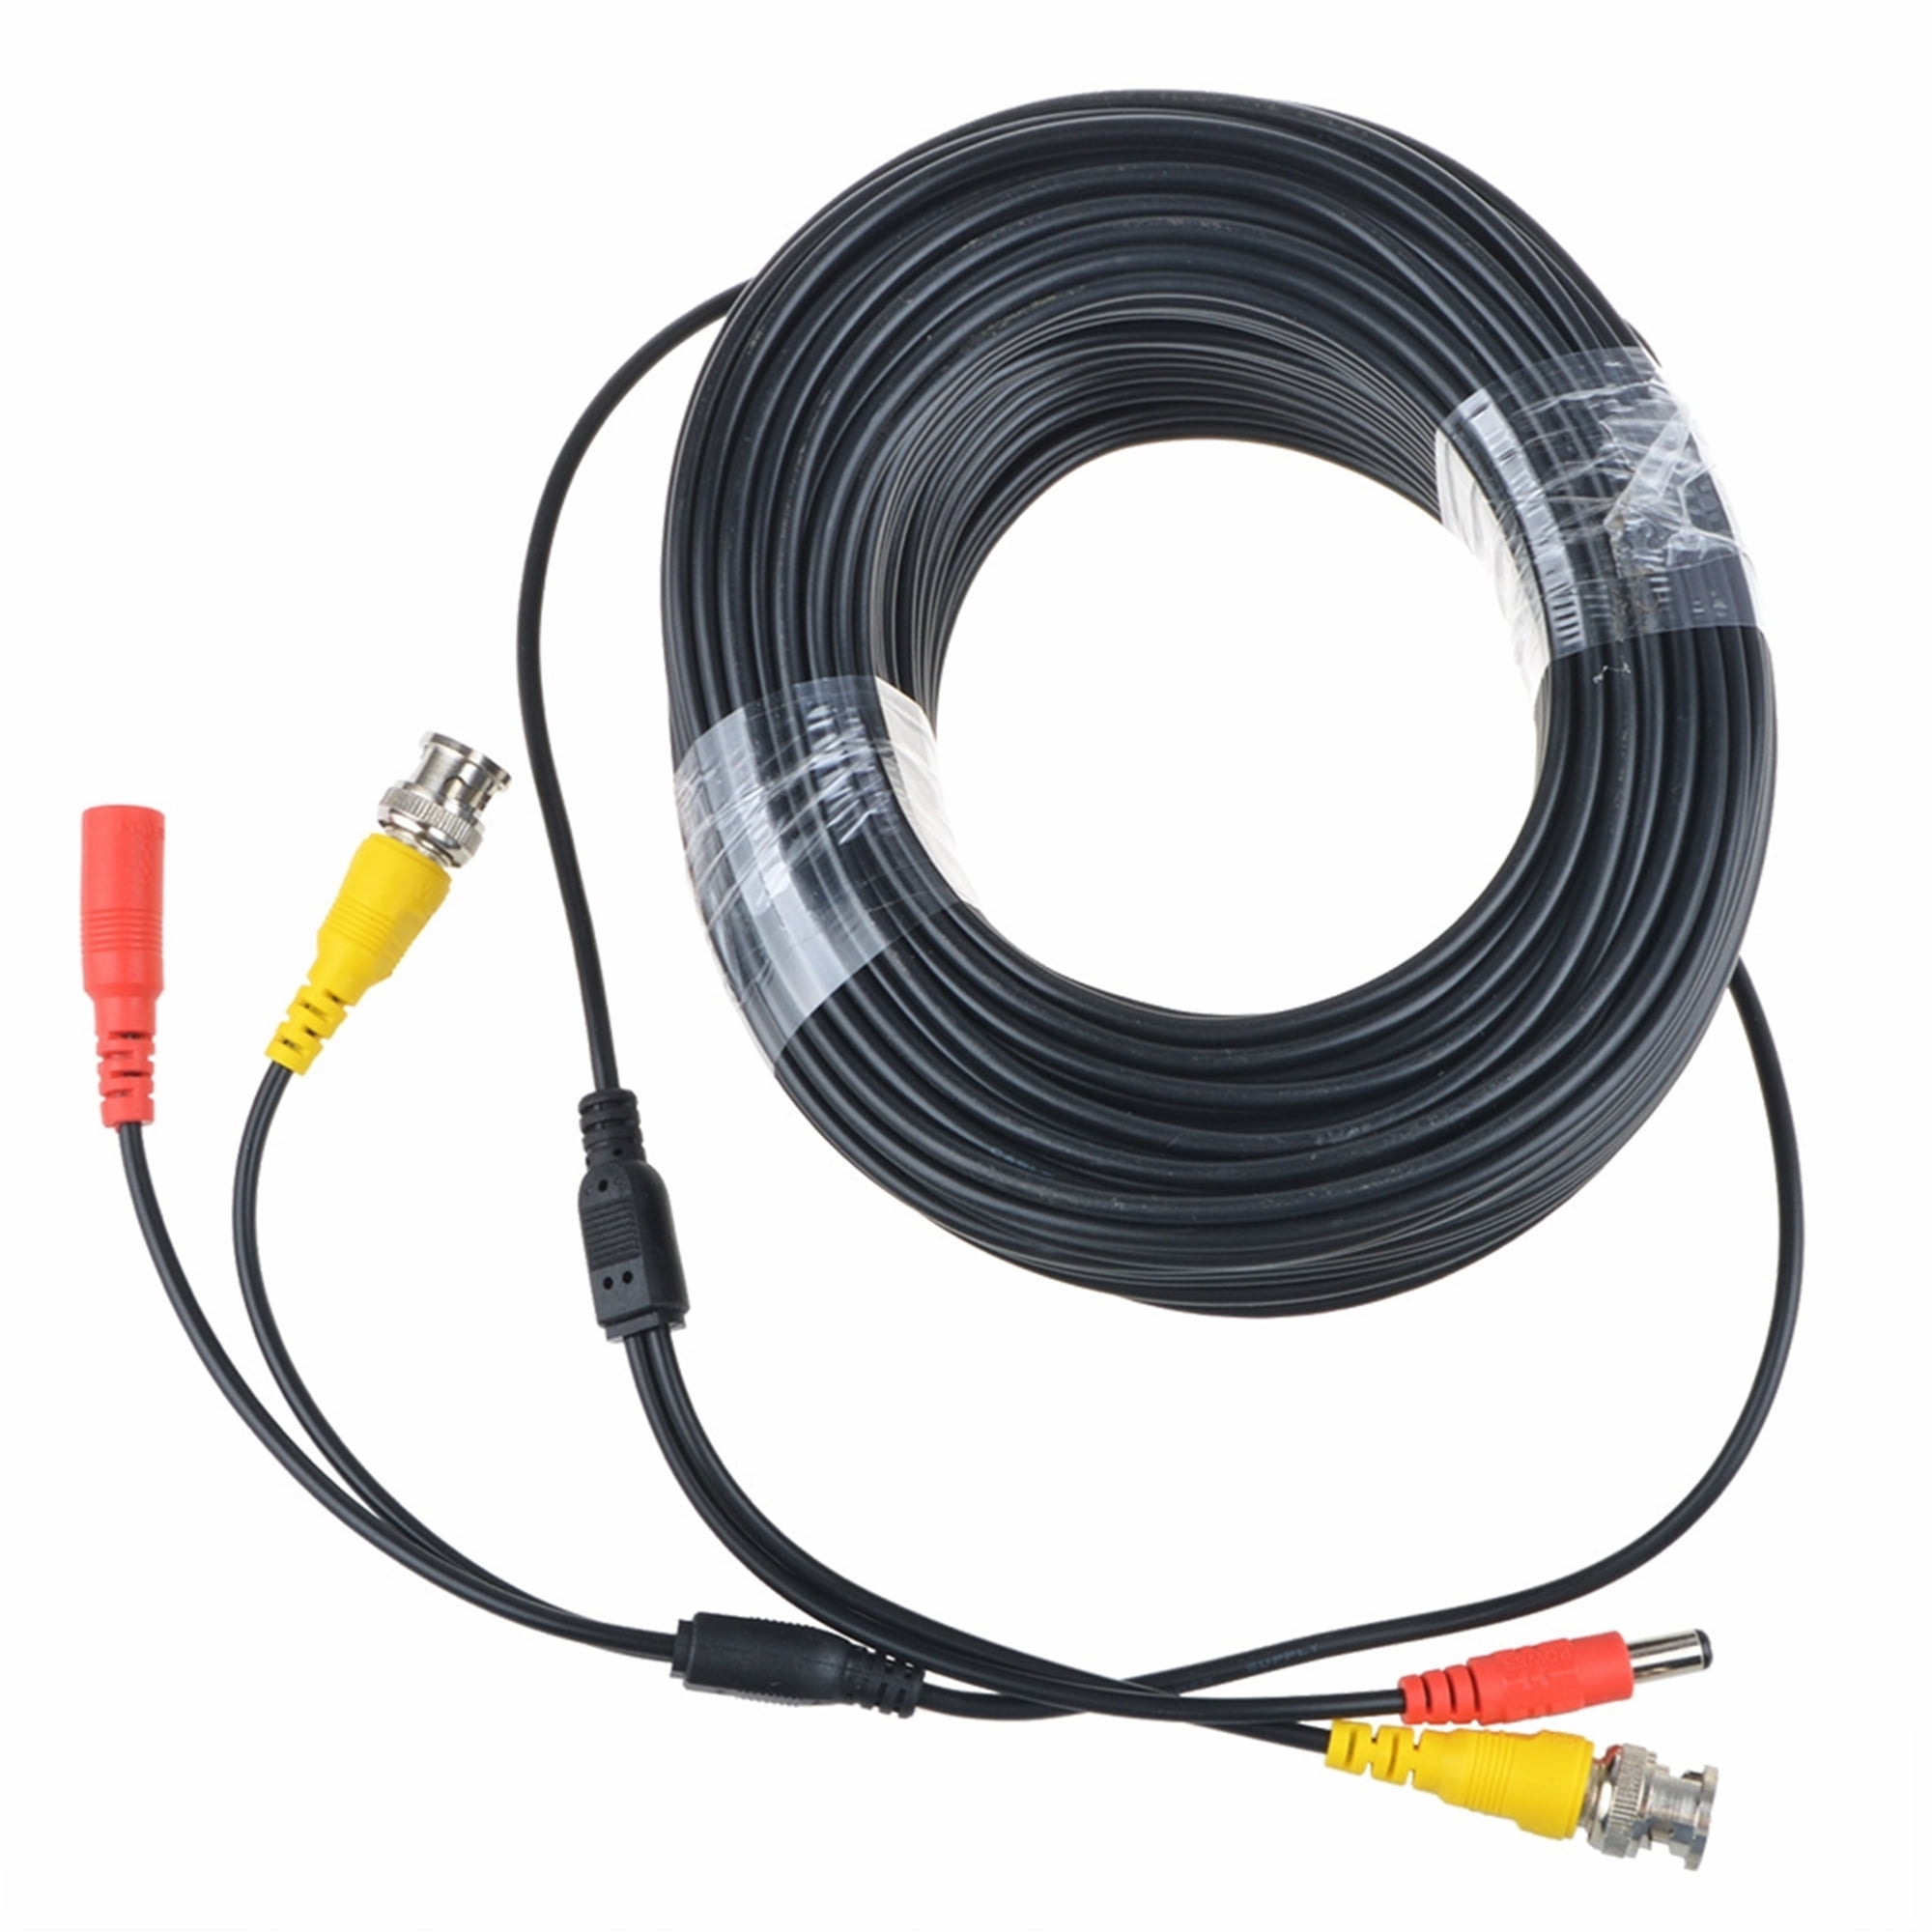 25ft Video and Power BNC extension Cable Cord for CCTV Security Cameras Defender 